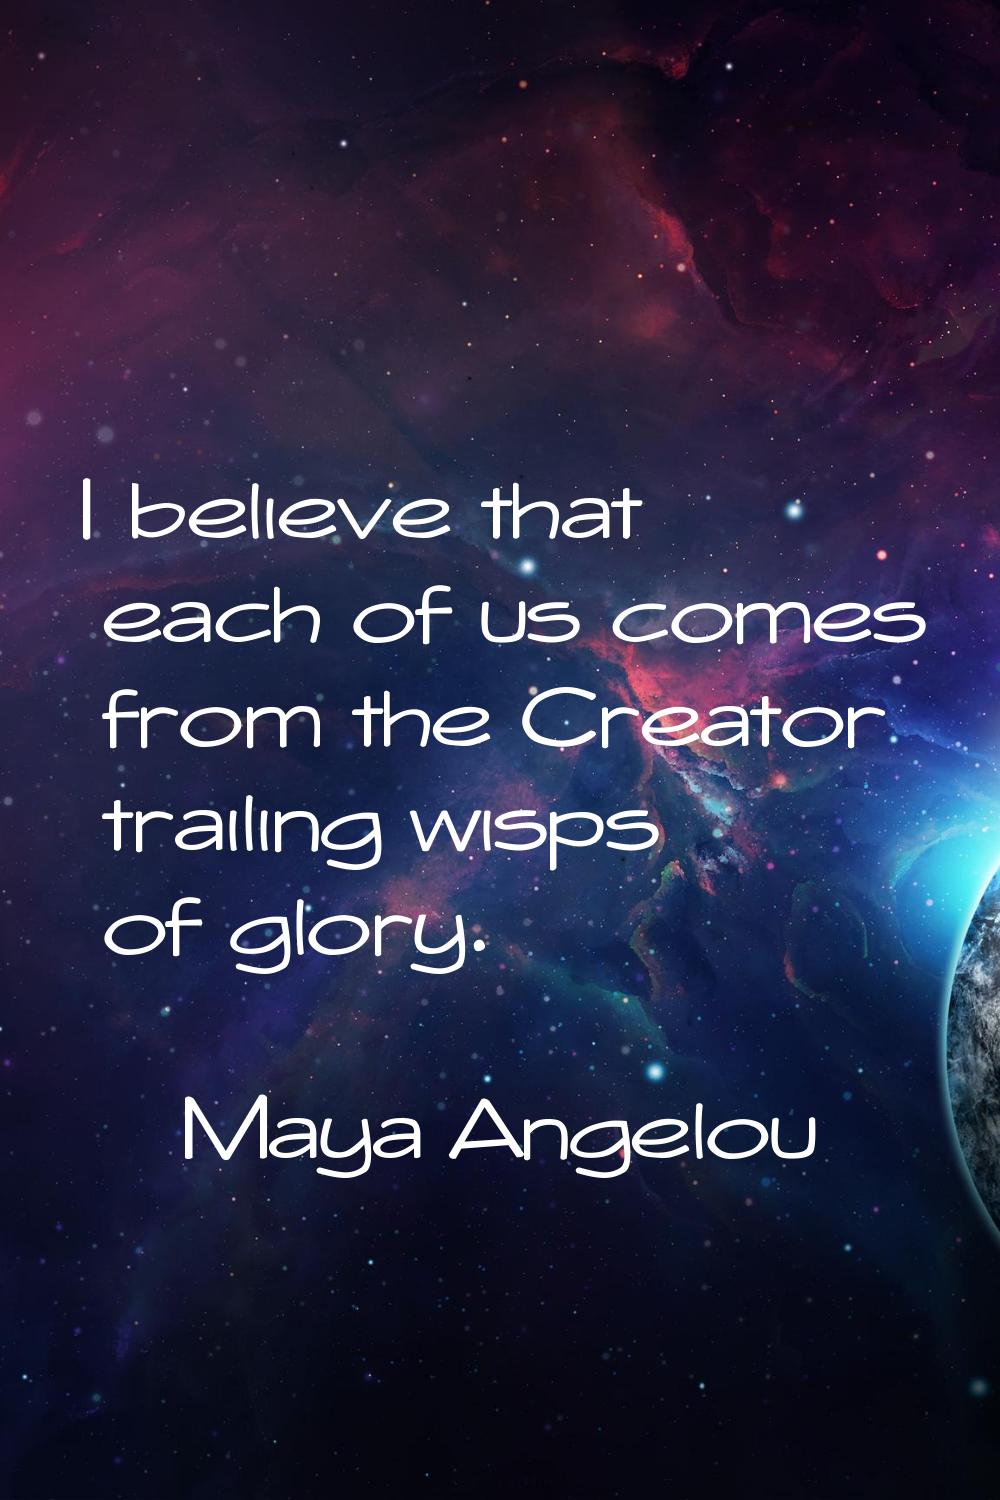 I believe that each of us comes from the Creator trailing wisps of glory.